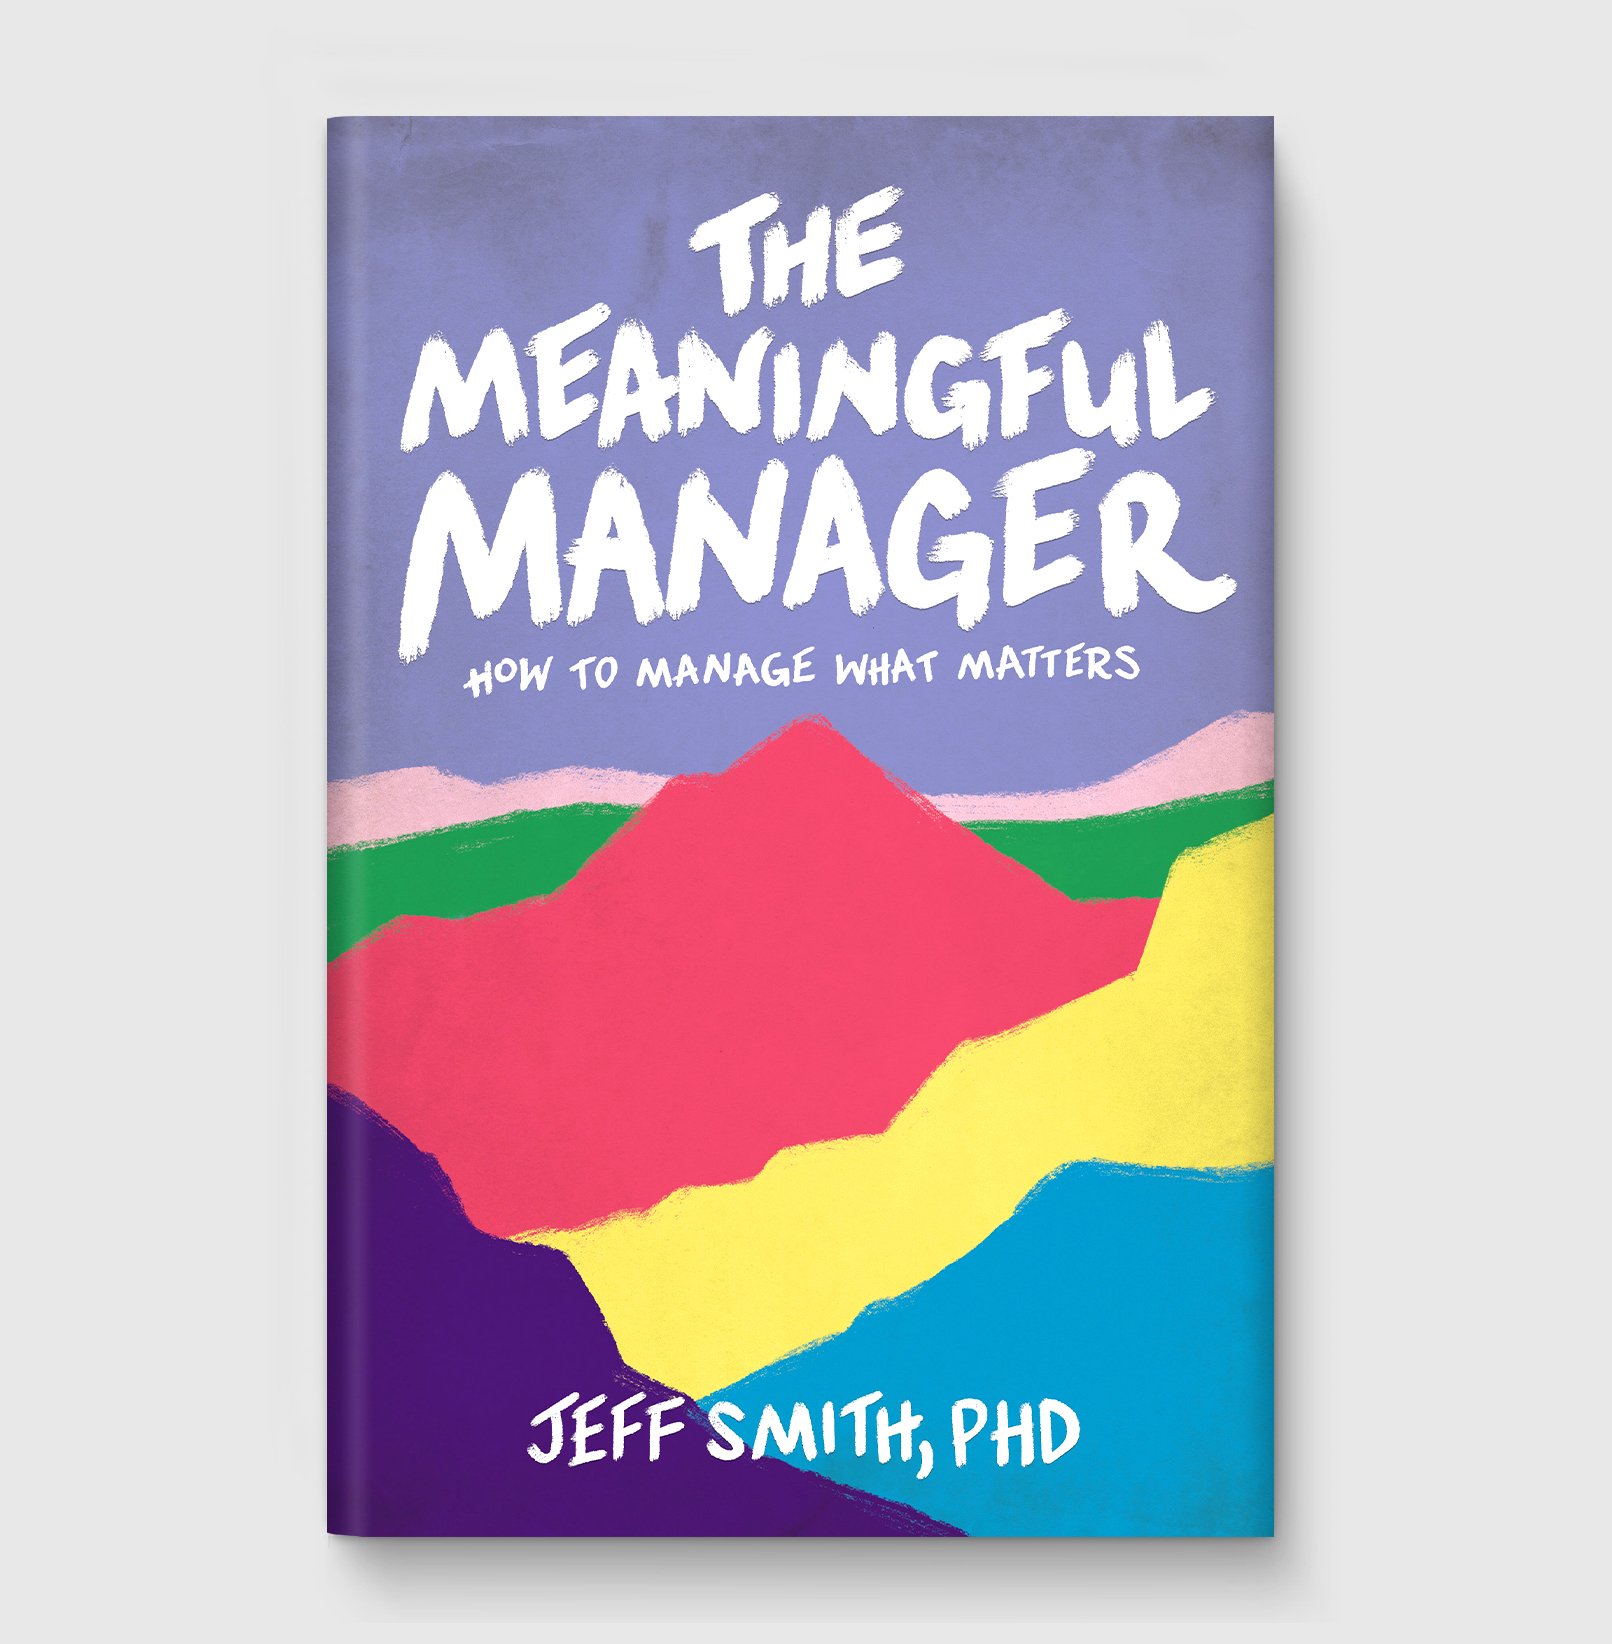 The Meaningful Manager